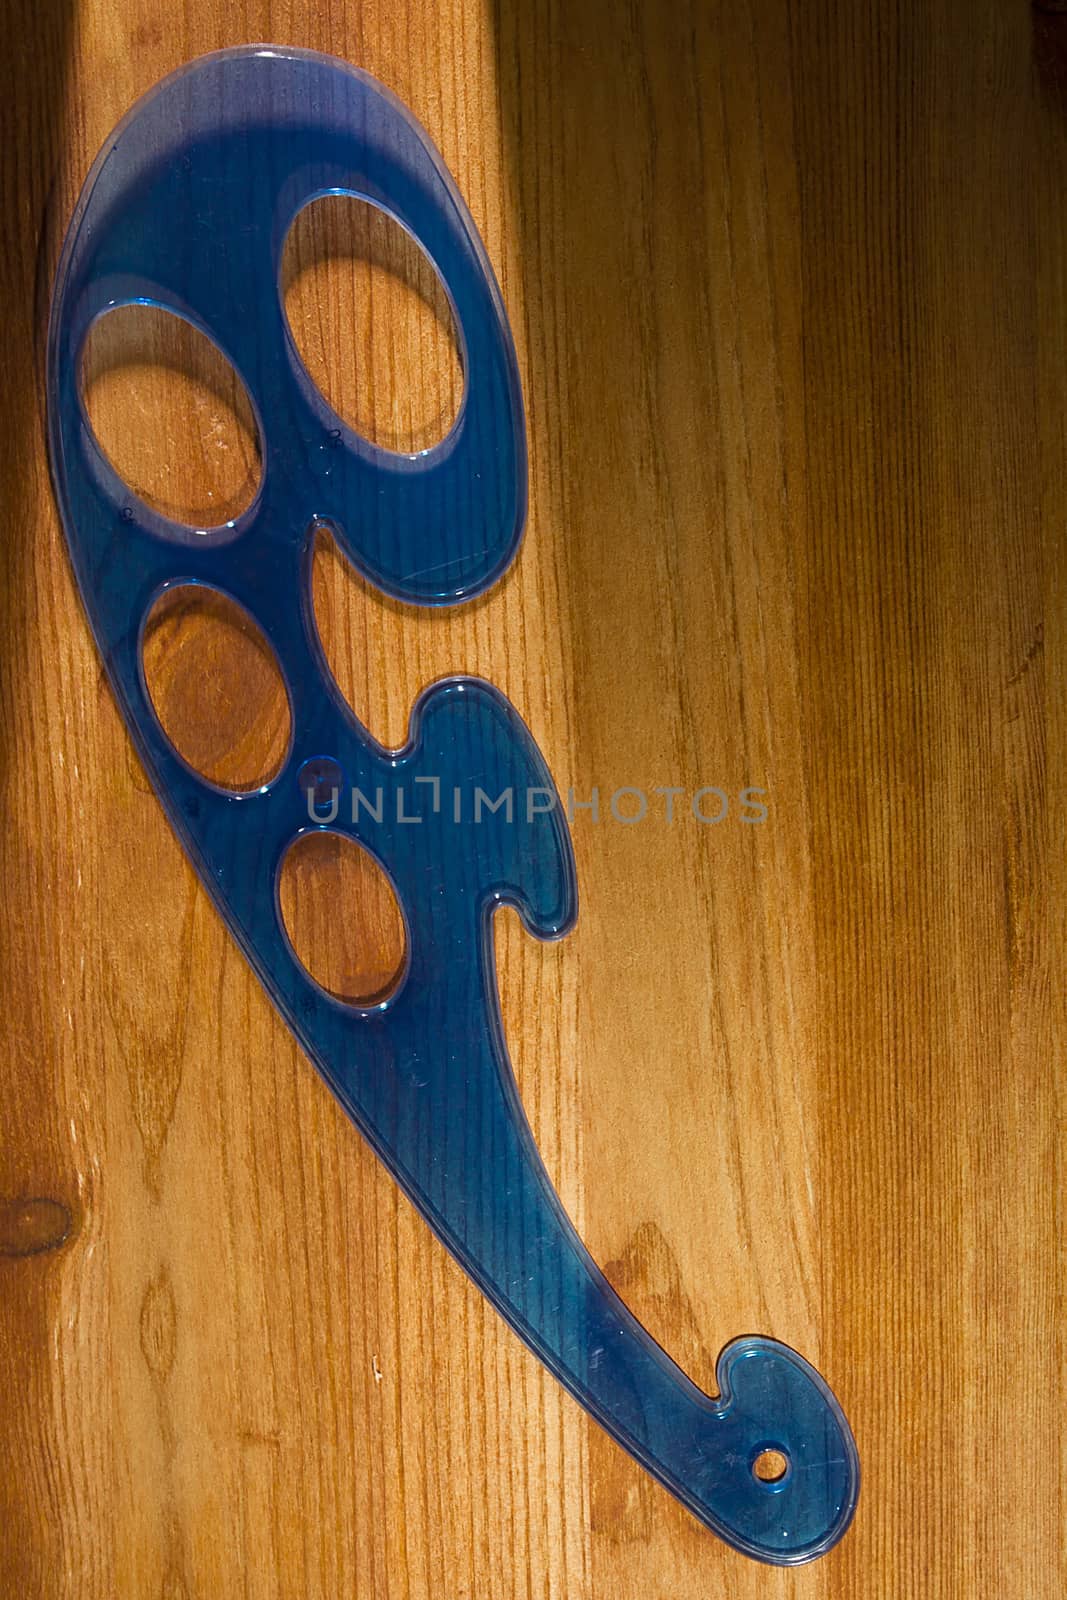 Plastic blue pattern on a wooden table